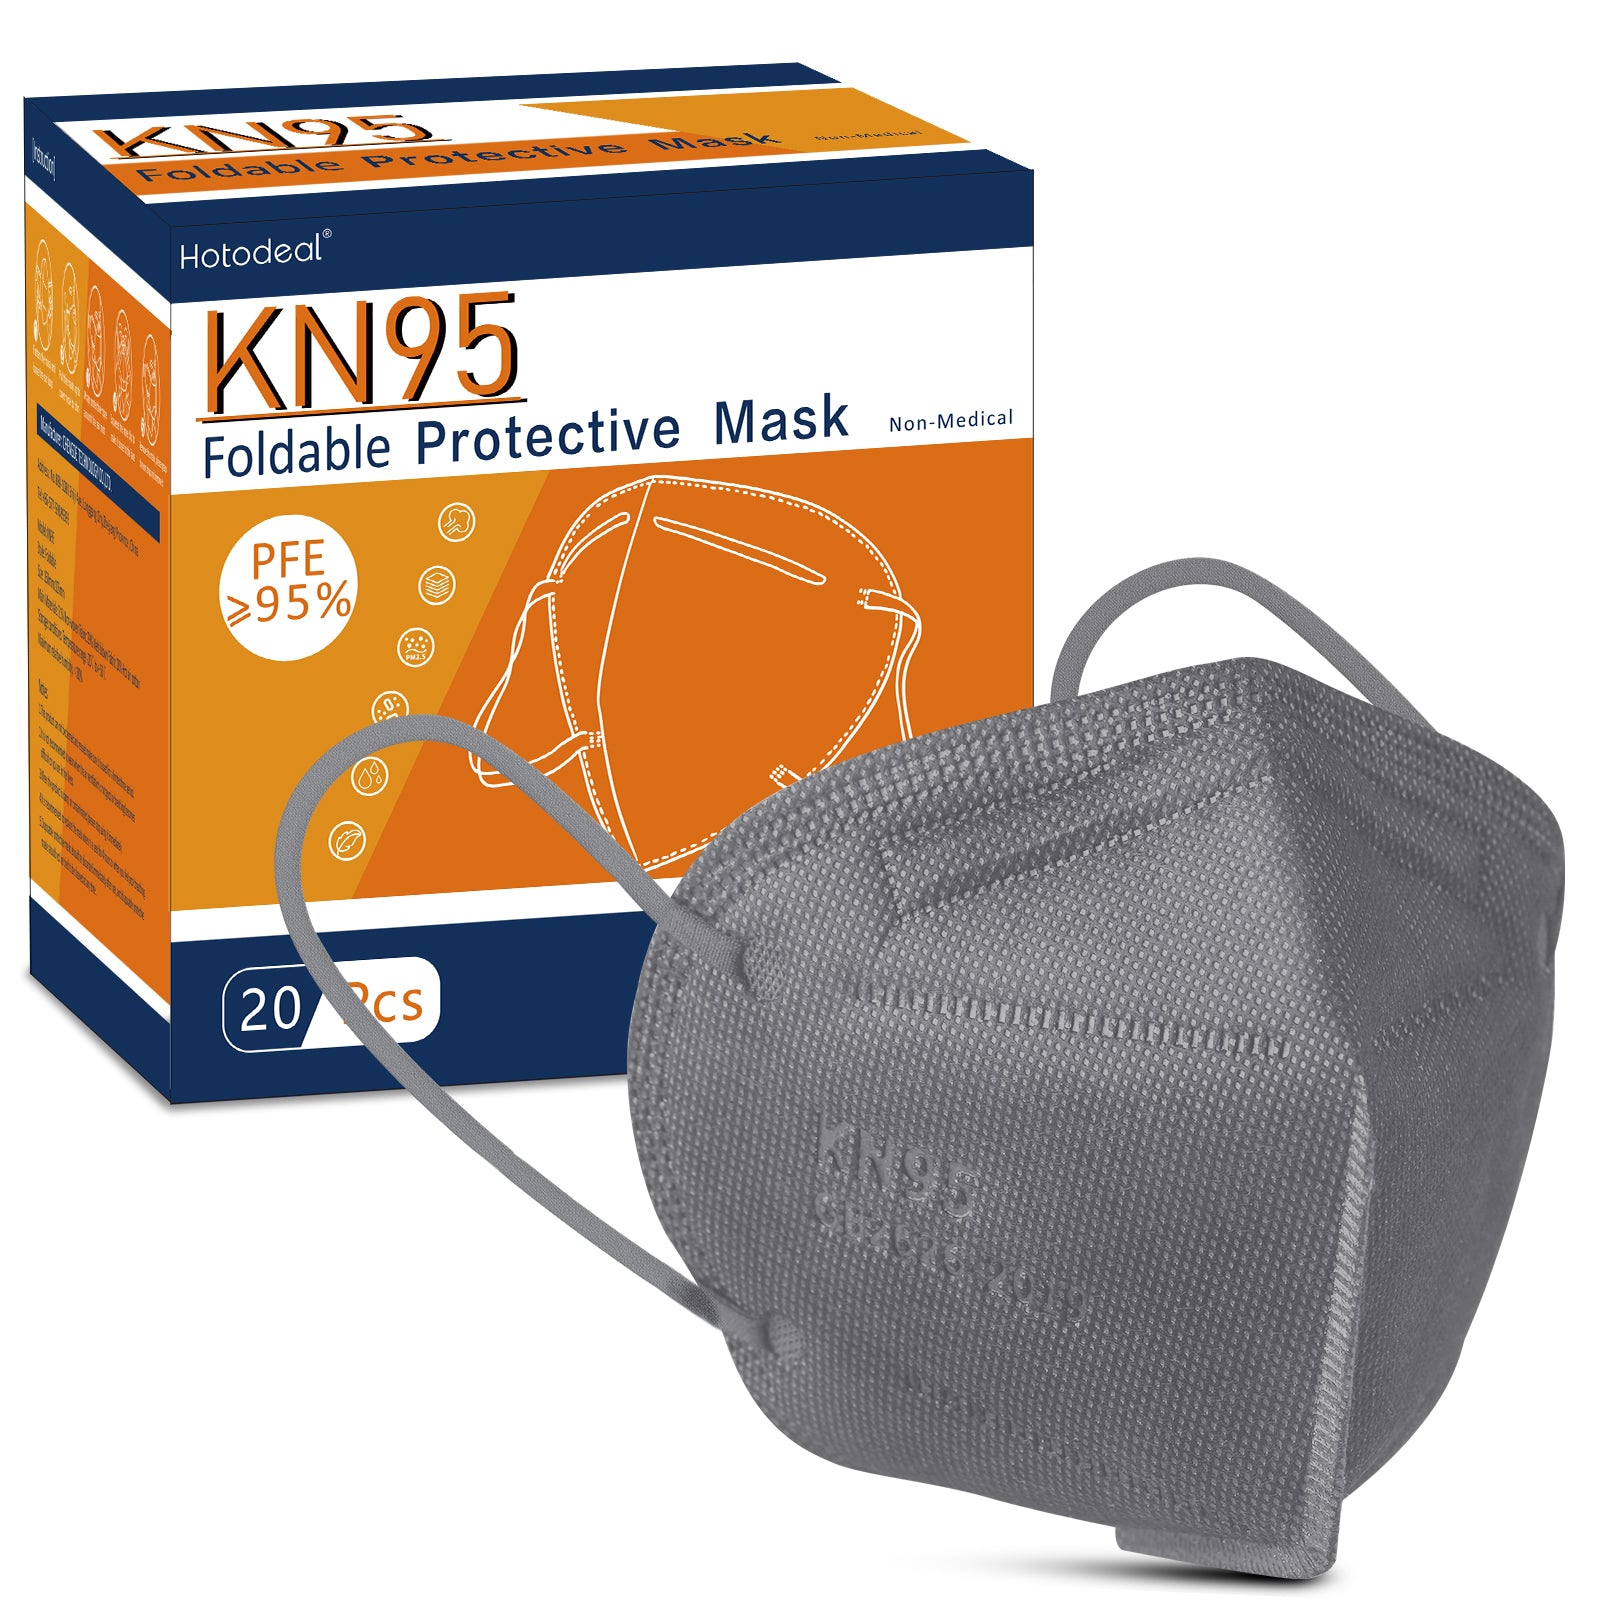 KN95 Face Mask 20 PCS, Filter Efficiency≥95%, 5 Layers Cup Dust Mask Against PM2.5 from Fire Smoke, Dust, for Men, Women, Essential Workers